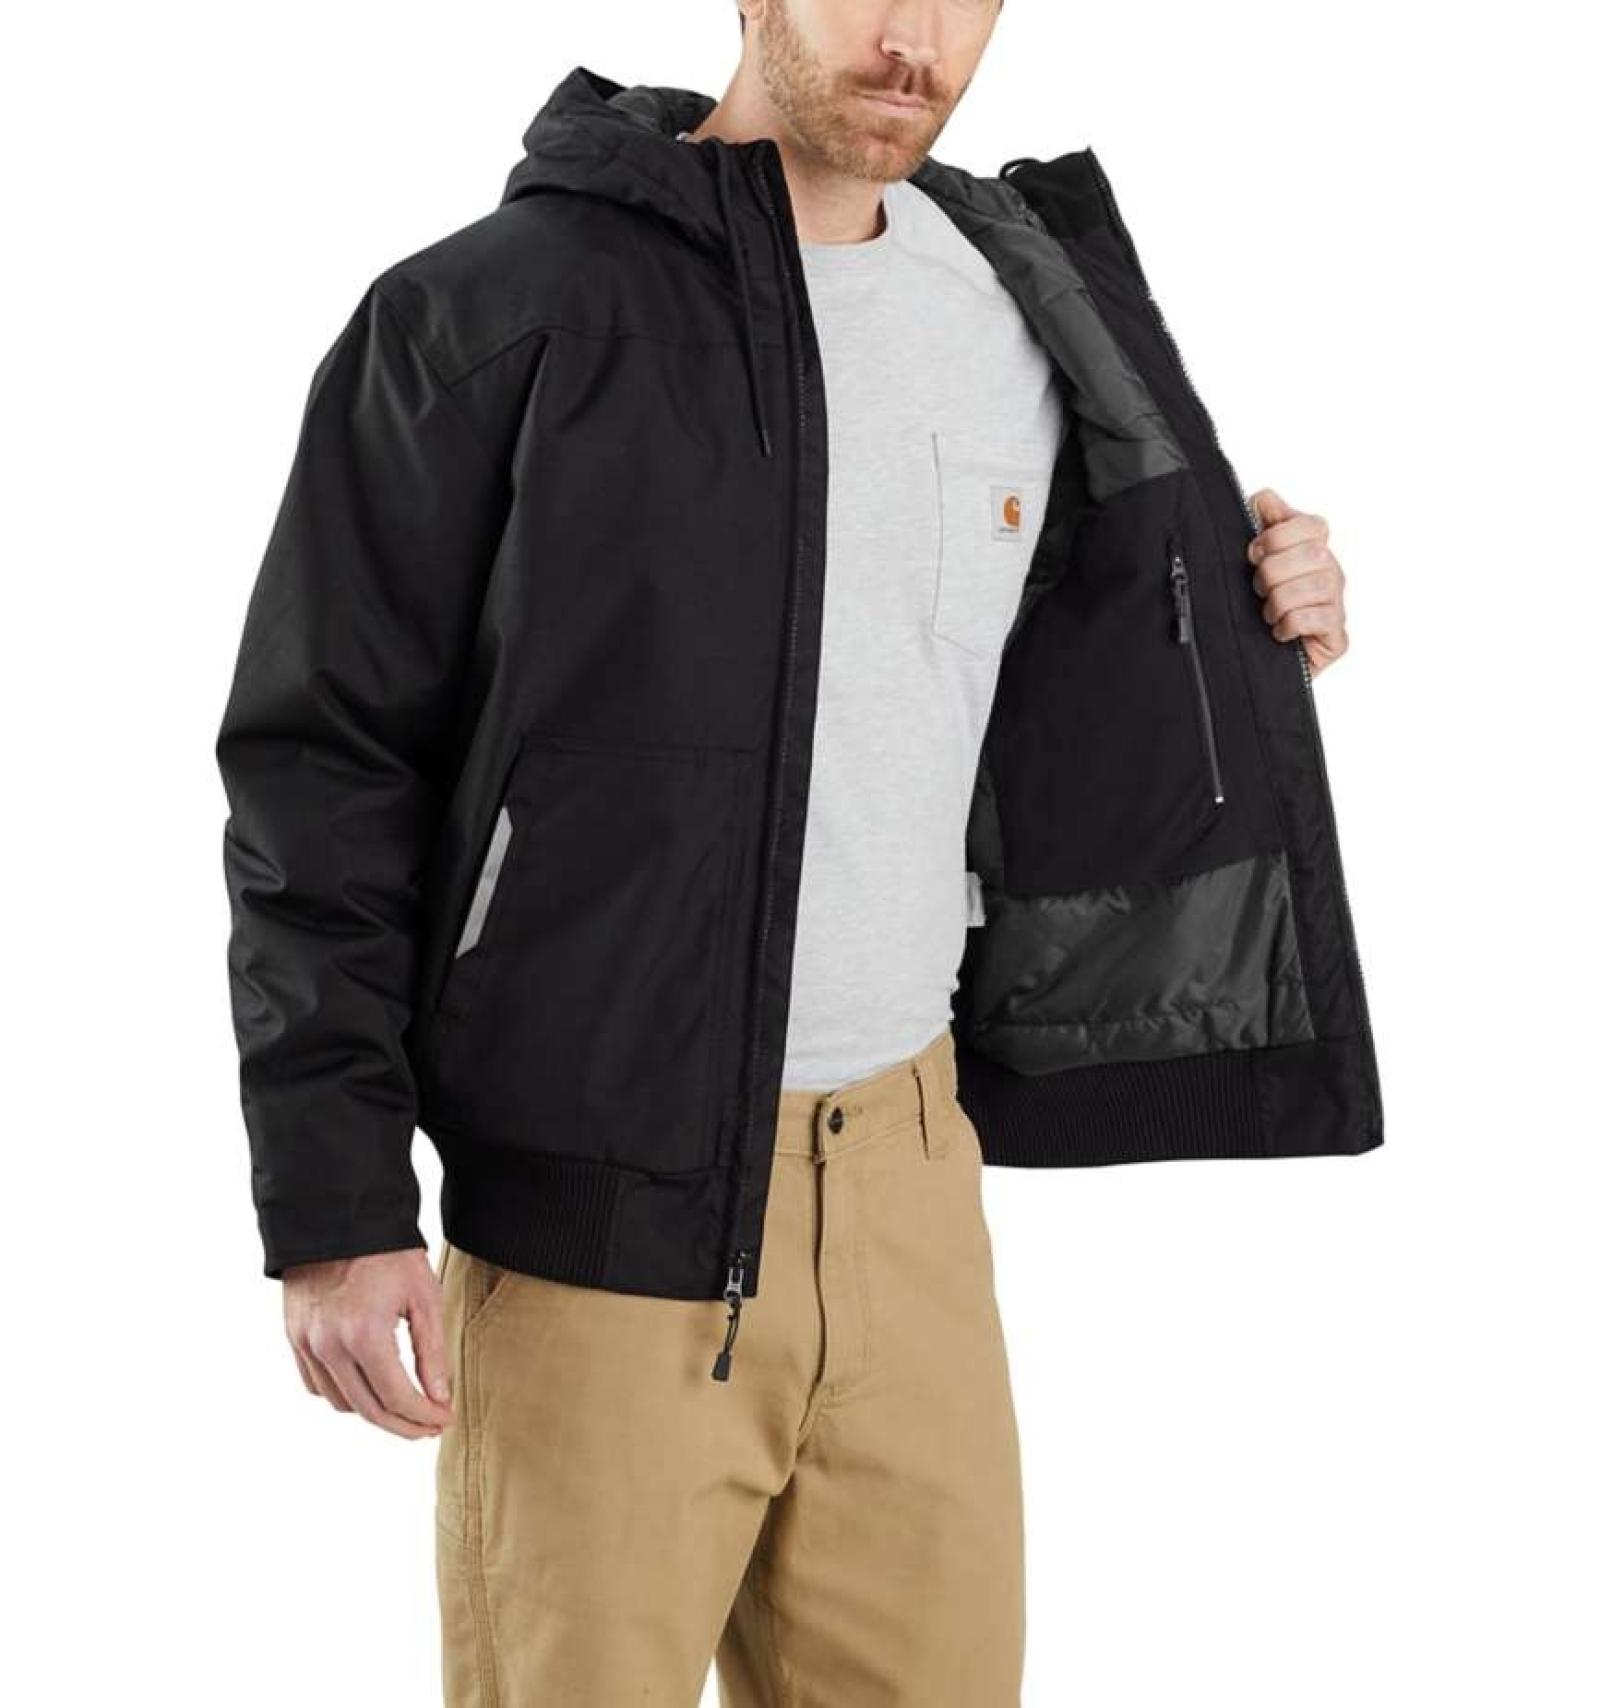 Carhartt Men's Yukon Extremes Insulated Active Jac Left Side Open